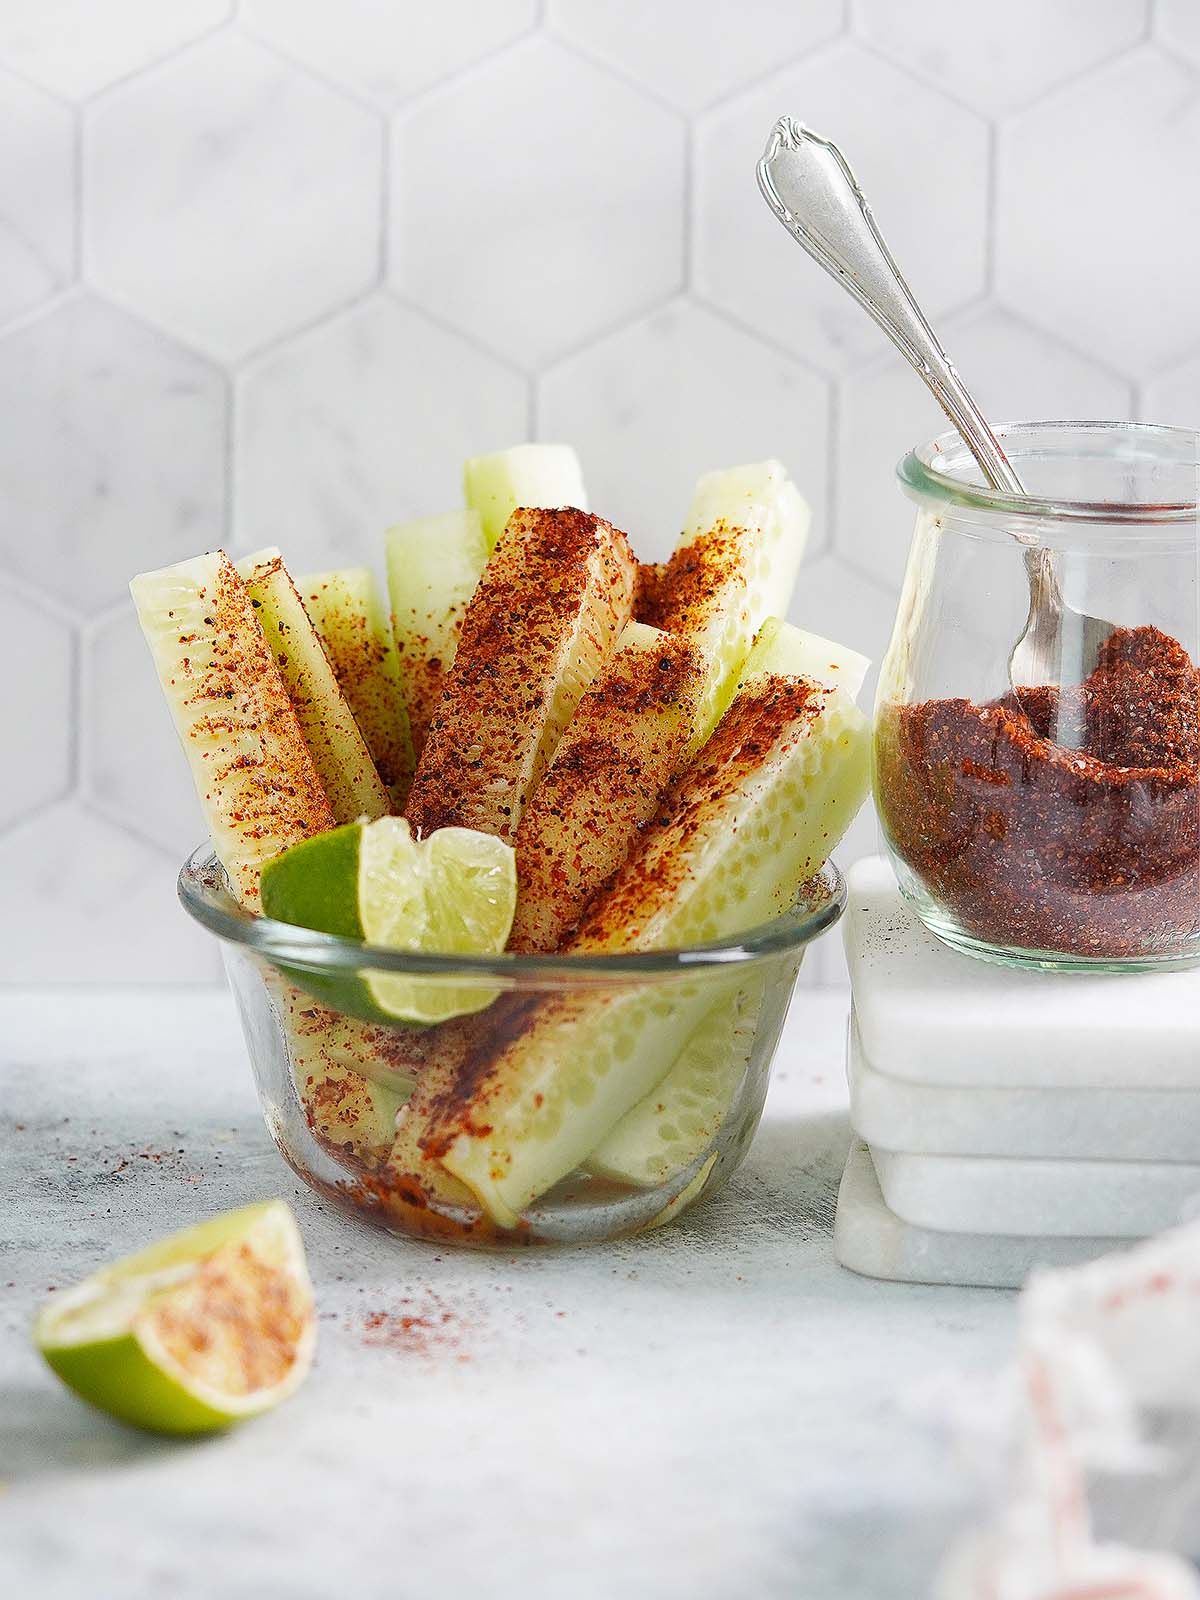 A cup with cucumber slices sprinkled with chili seasoning.